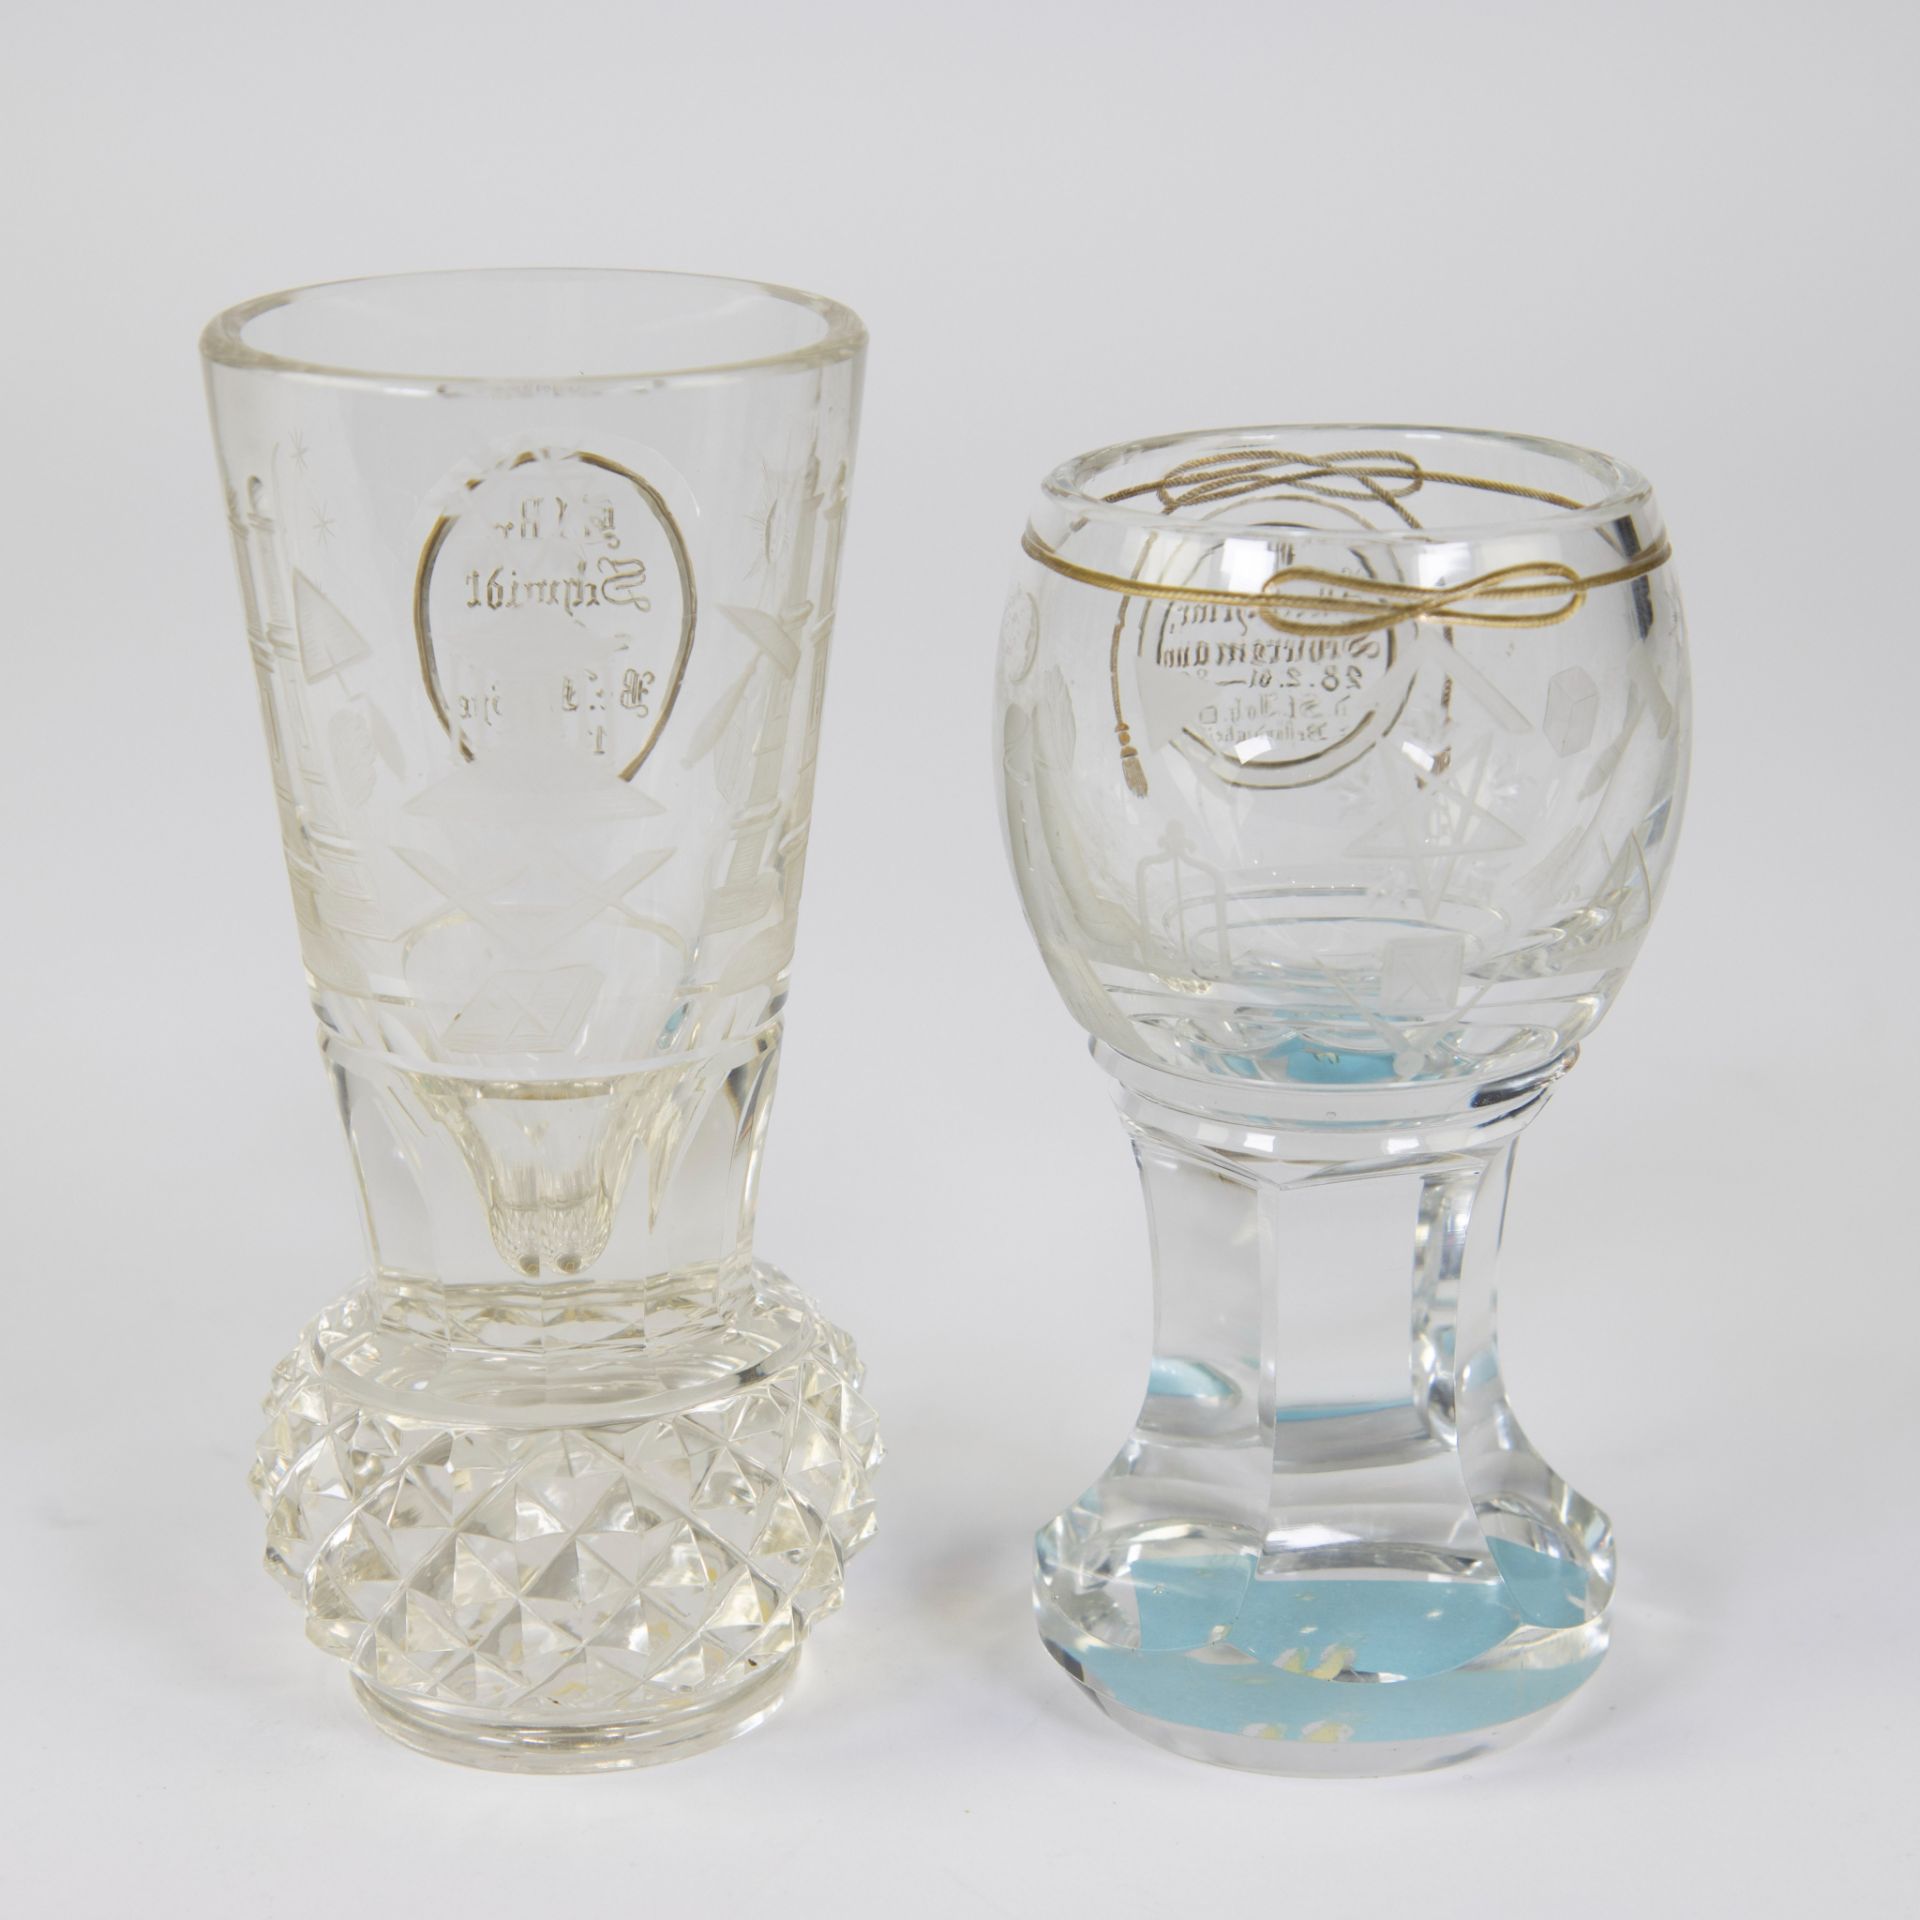 2 heavy crystal glasses with gold decoration of Freemasonry, 19th/20th century - Image 3 of 4